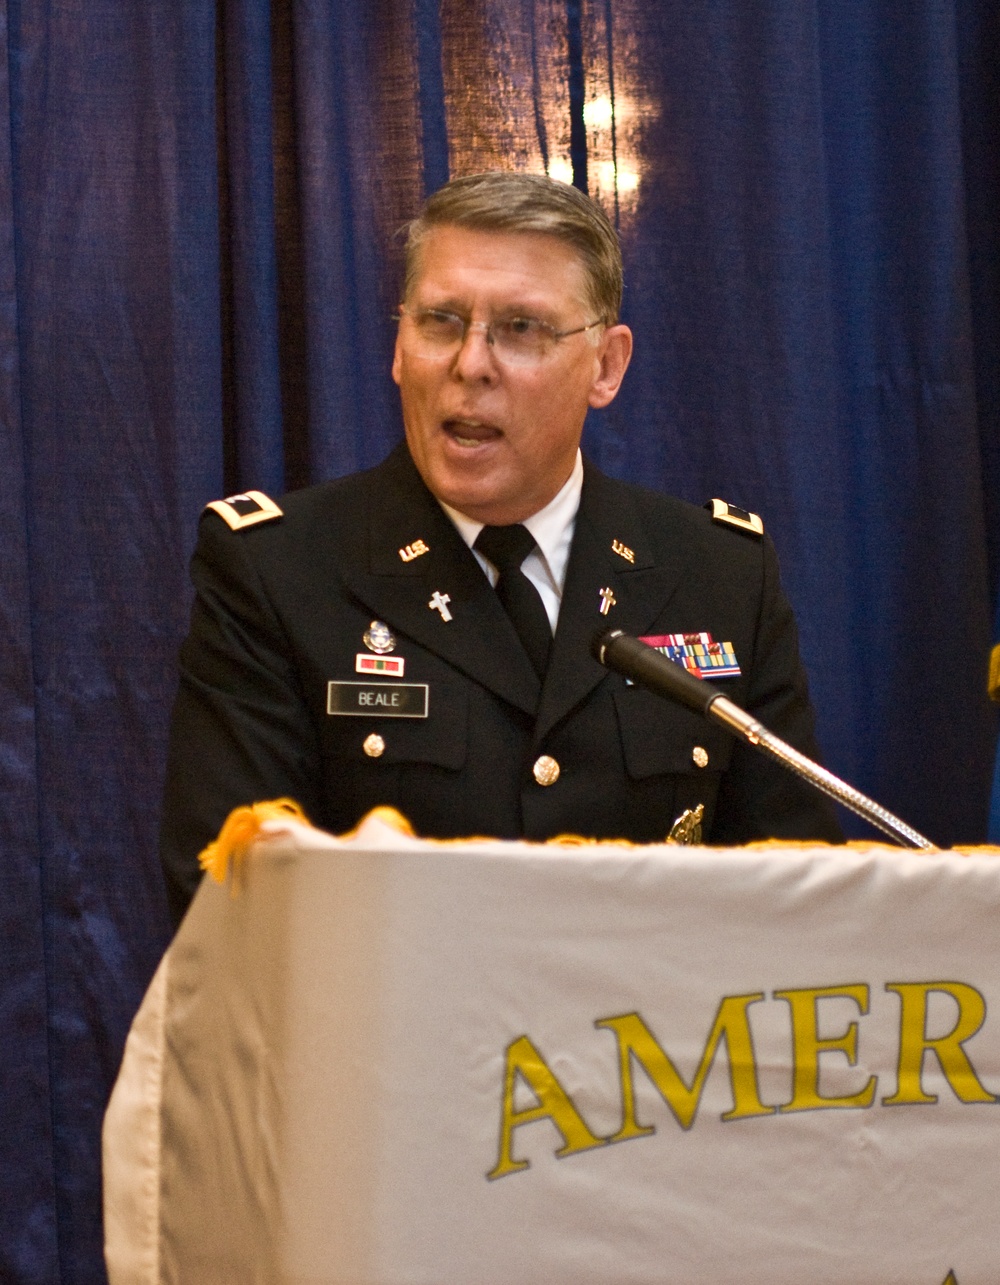 Chaplain Beale performs invocation at 2011 Festival of Tribute and Honor opening ceremony